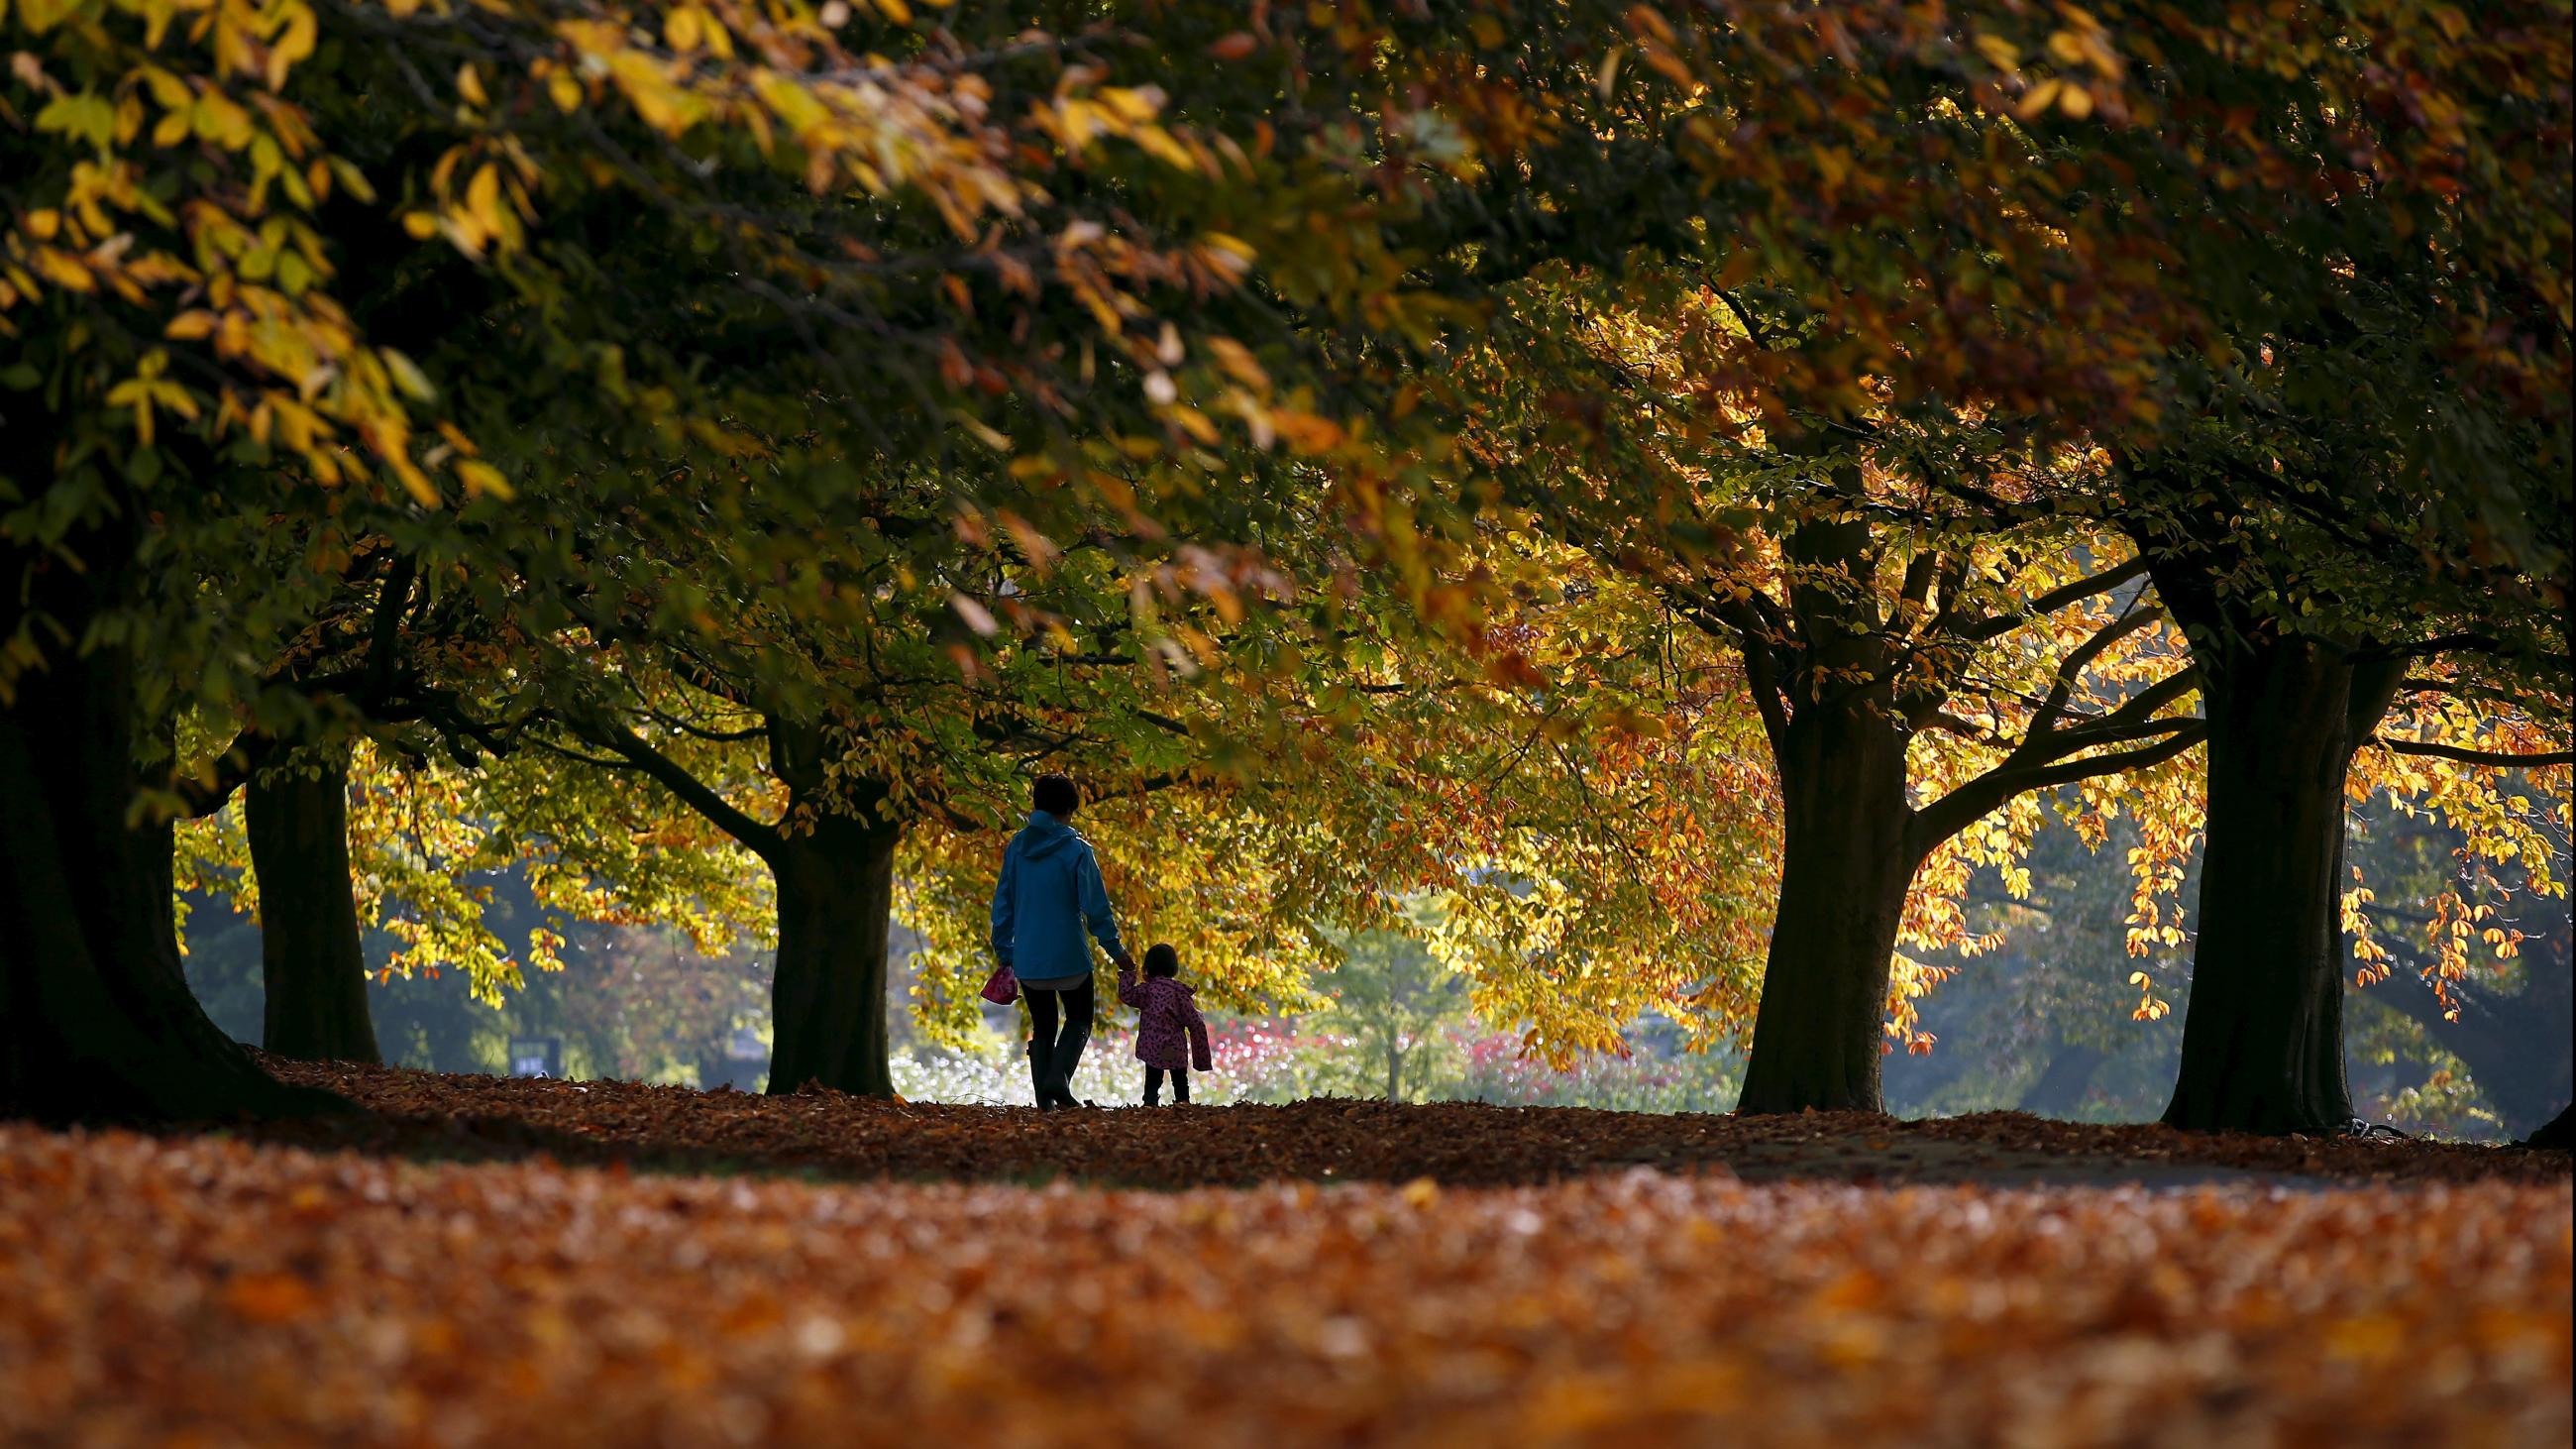 A woman and child walk through fallen leaves in Clarke's Gardens in Liverpool, United Kingdom (2015).